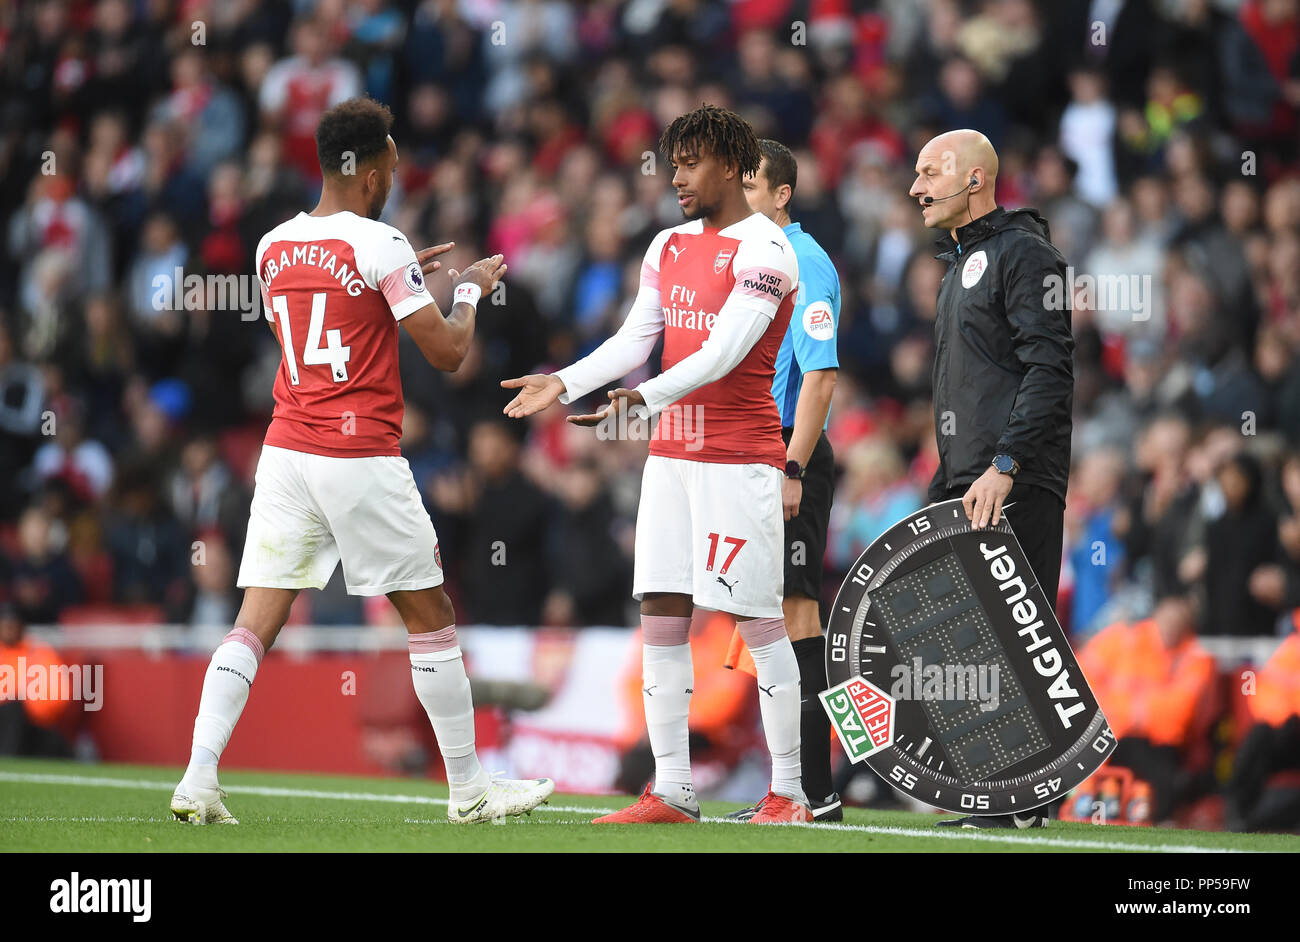 Pierre-Emerick Aubameyang and Alex Iwobi of Arsenal in action during the Premier League match between Arsenal and Everton at Emirates Stadium on September 23rd 2018 in London, England. (Photo by Zed Jameson/phcimages.com) Stock Photo